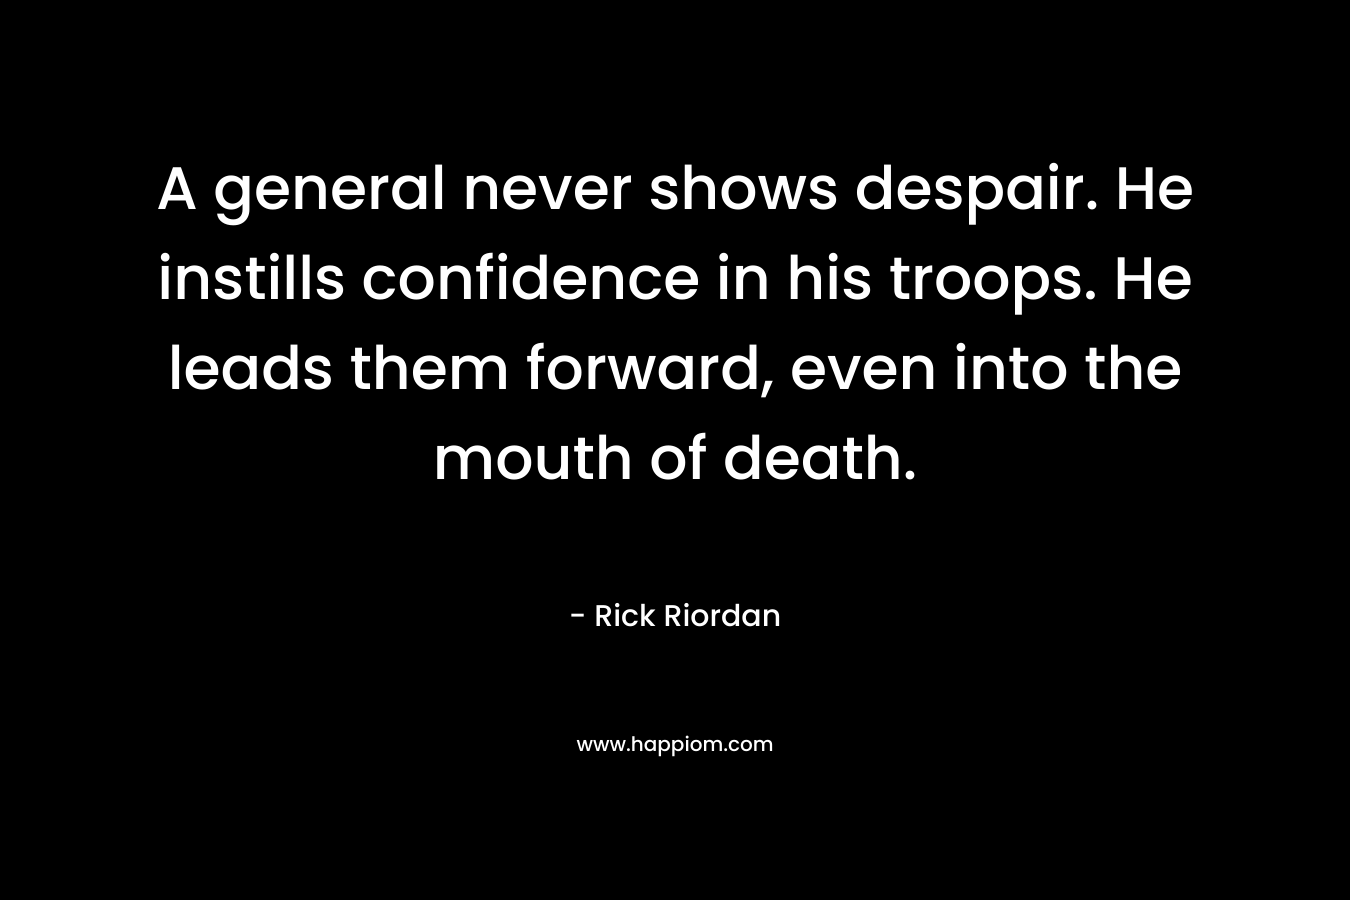 A general never shows despair. He instills confidence in his troops. He leads them forward, even into the mouth of death. – Rick Riordan